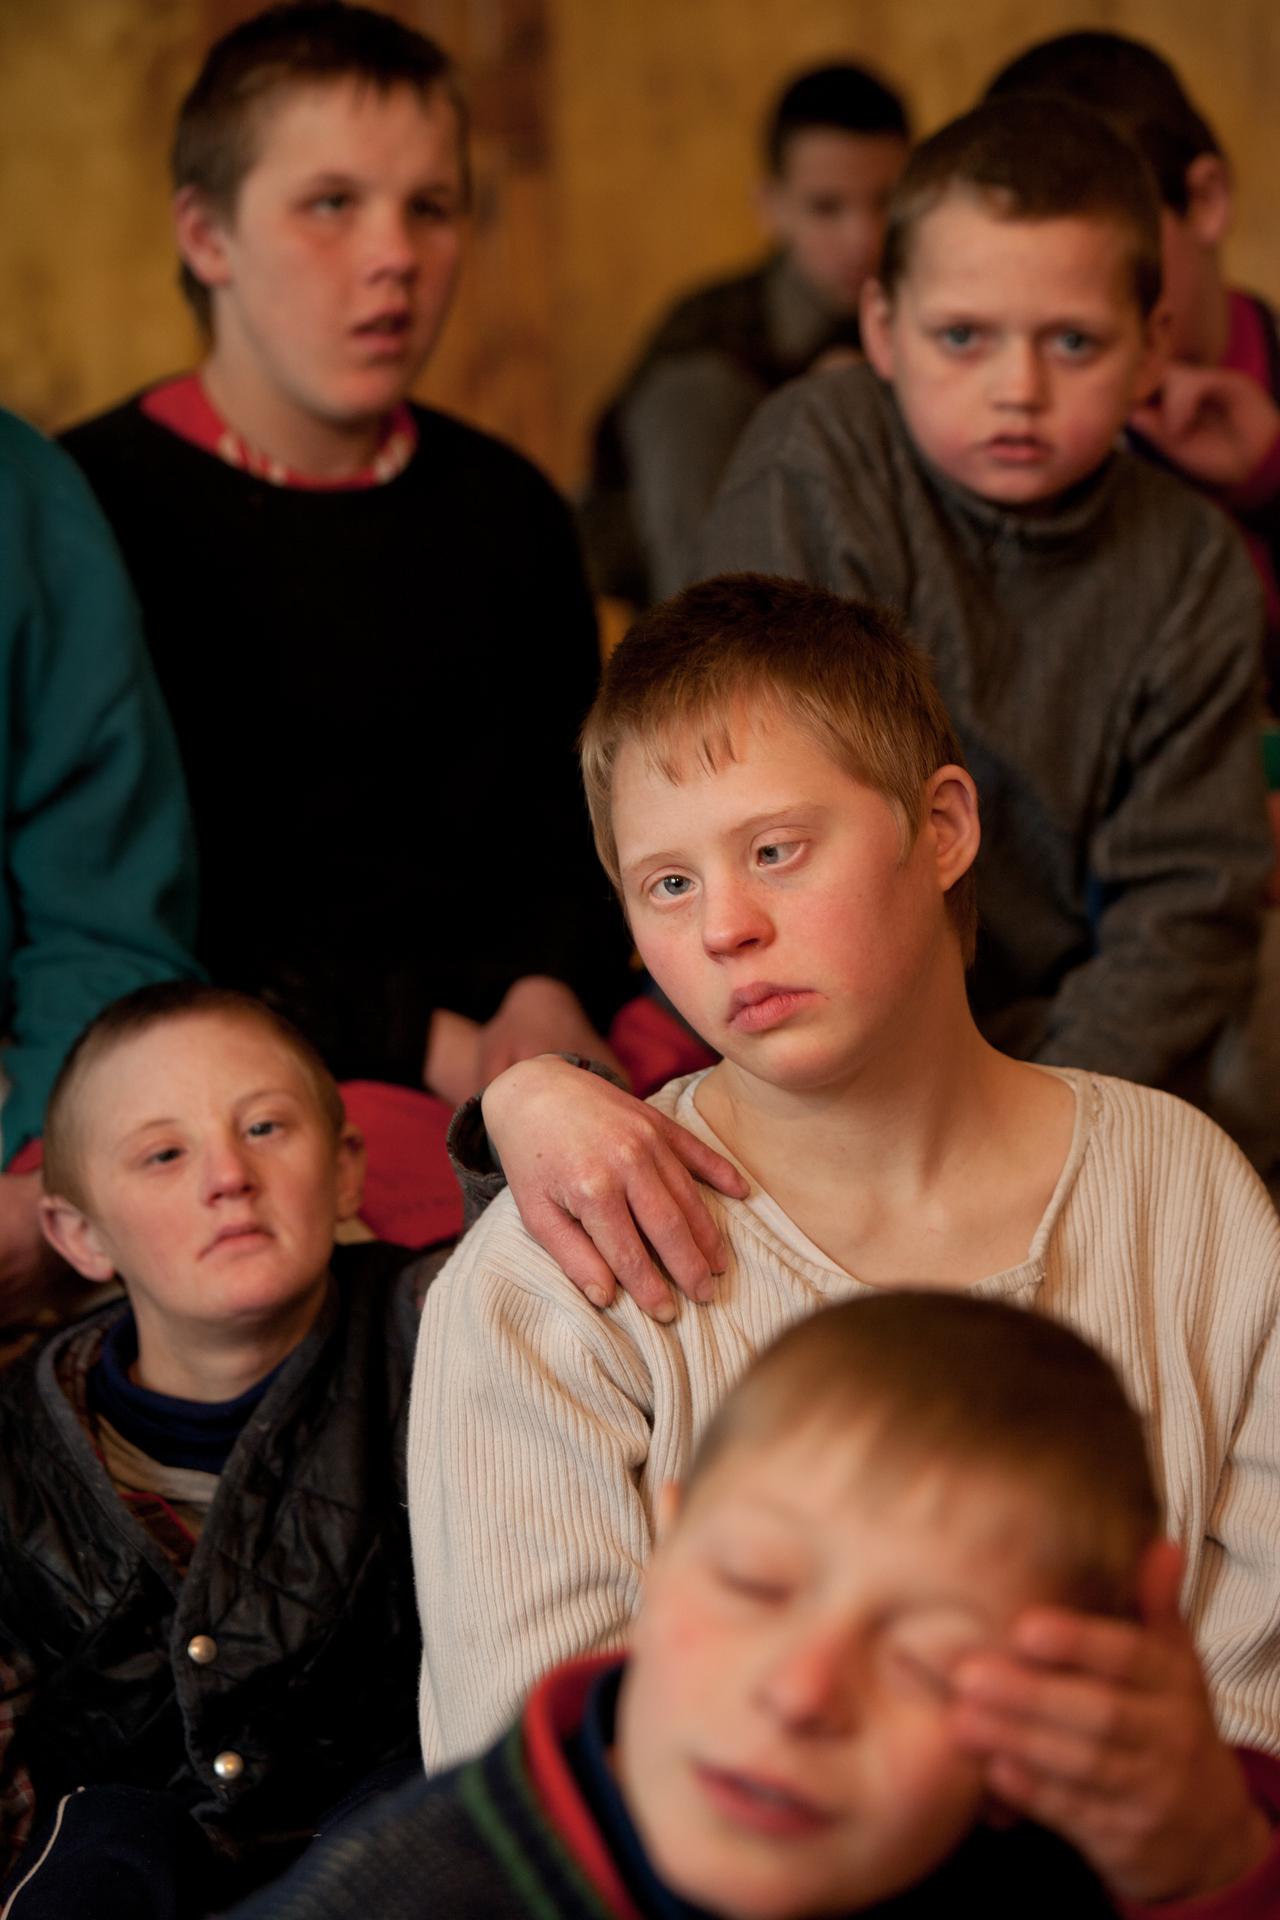  The Children’s’ Home in Vesnovo receives support from international aid organizations for the victims of Chernobyl to care for abandoned and orphaned children with mental and physical disabilities.  Vesnovo, Belarus  